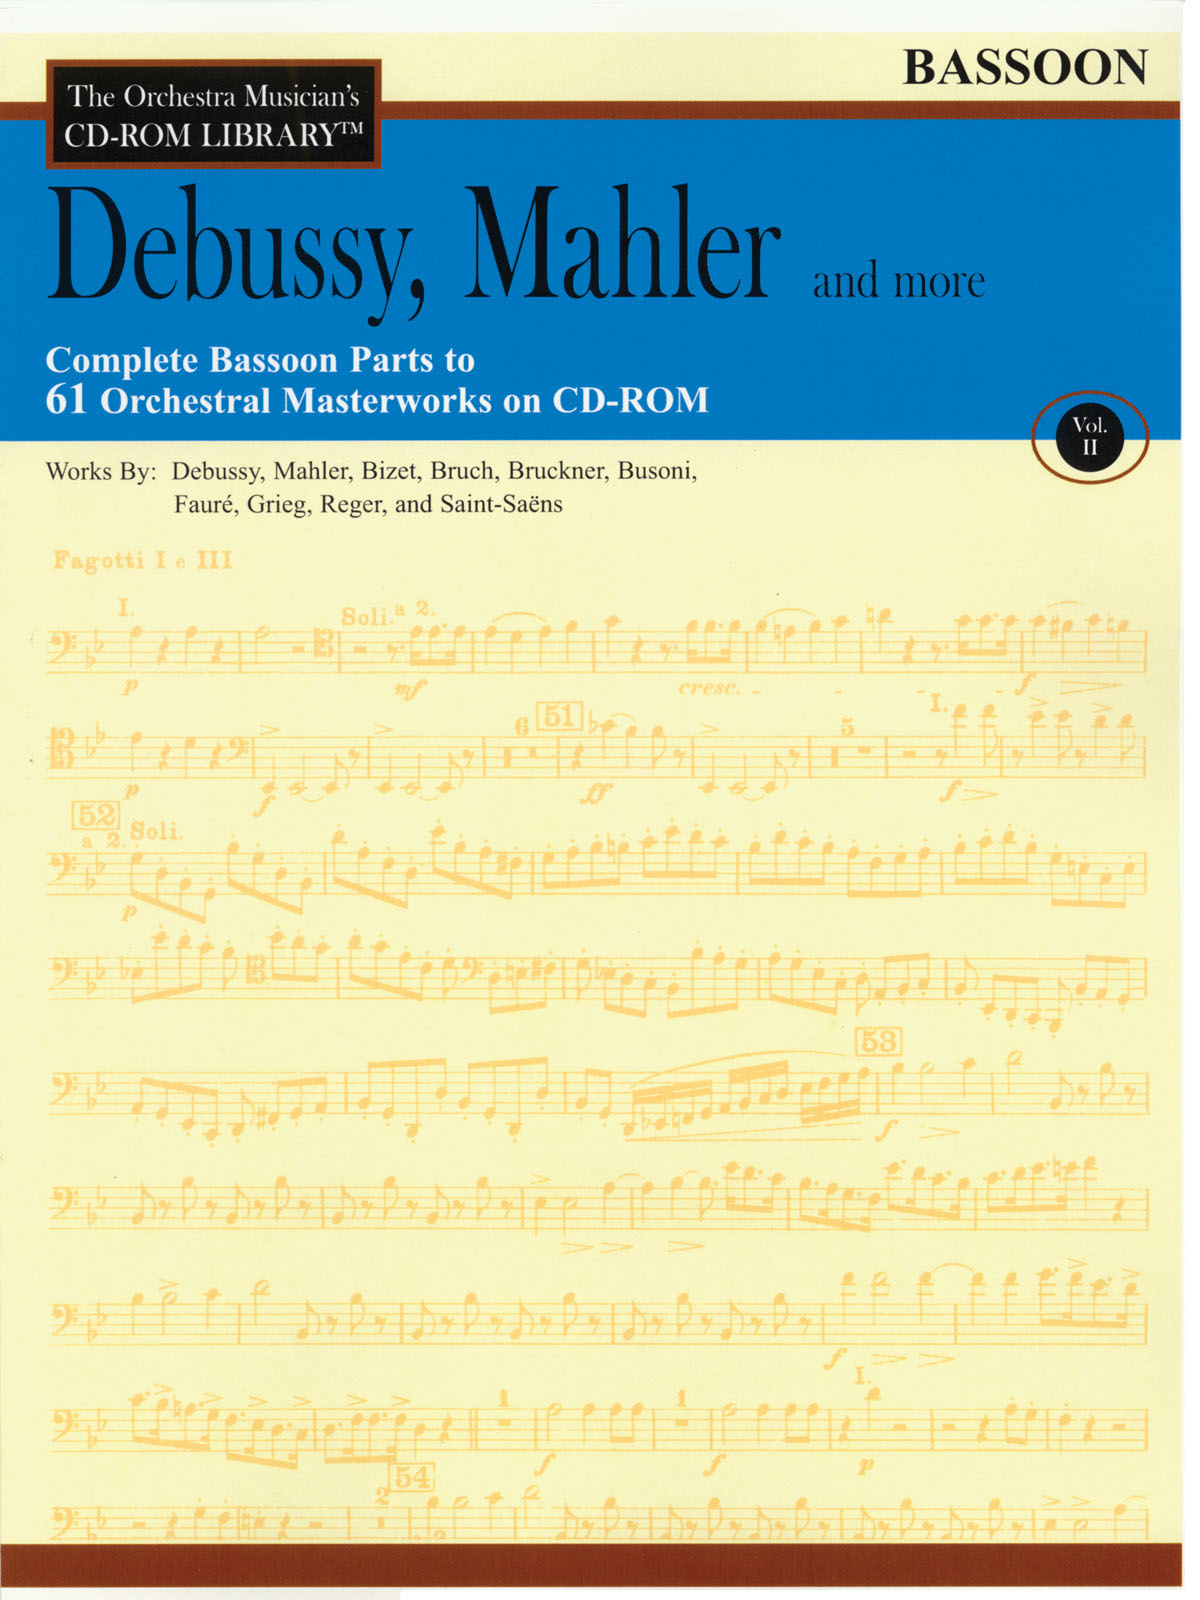 Debussy, Mahler and More - Volume 2(The Orchestra Musician's CD-ROM Library - Bassoon)